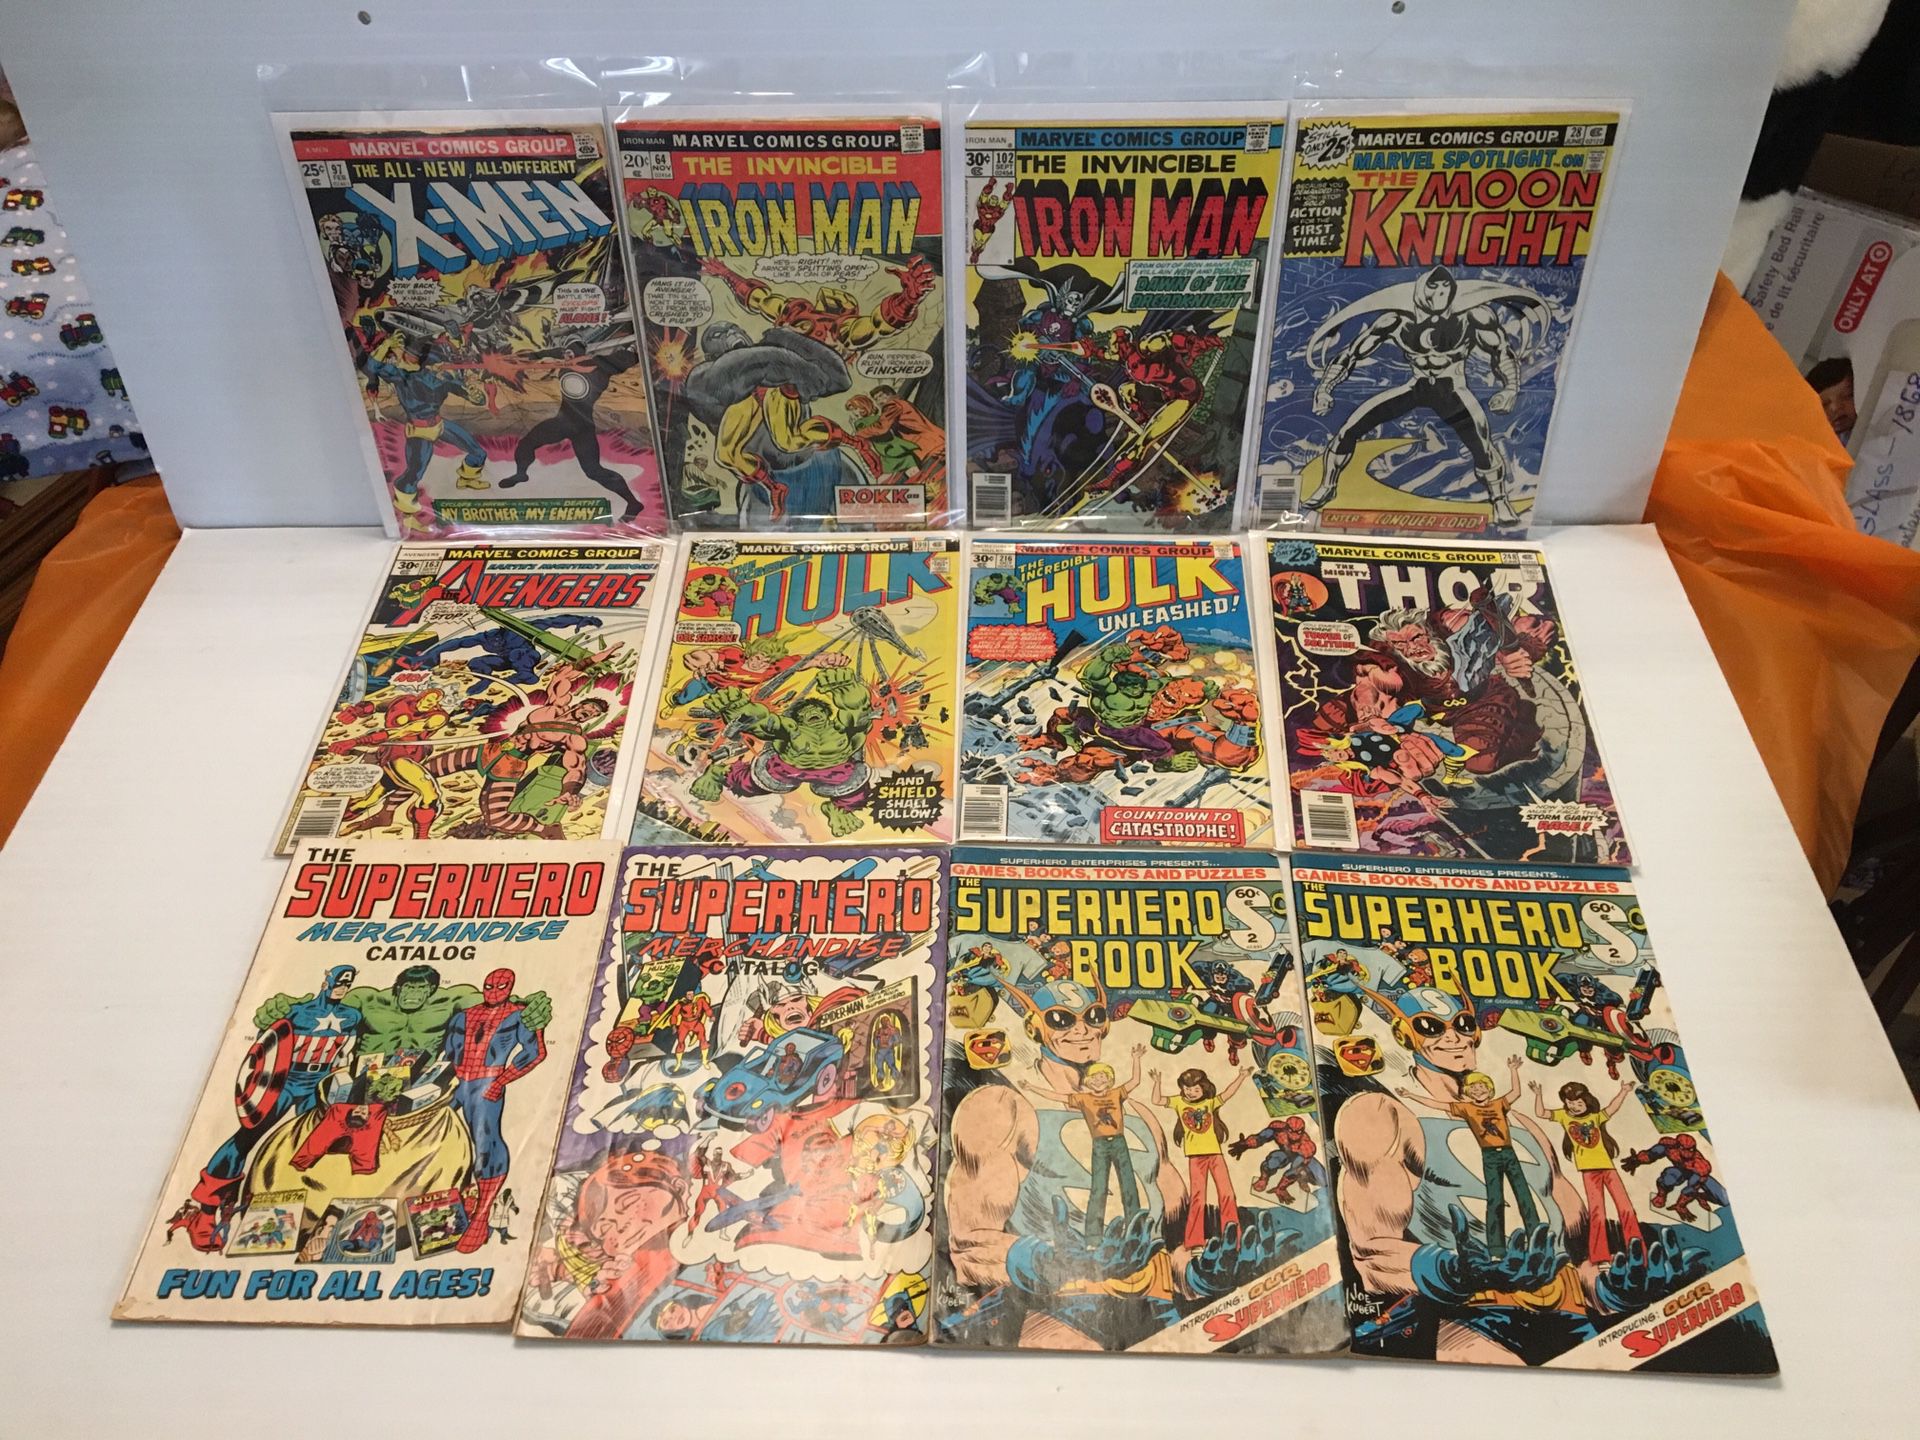 AVENGERS / IRON MAN / HULK / THOR / X-MEN / MOON KNIGHT / MARVEL SUPER HERO COMICS Will sell individually or in lot Message for prices